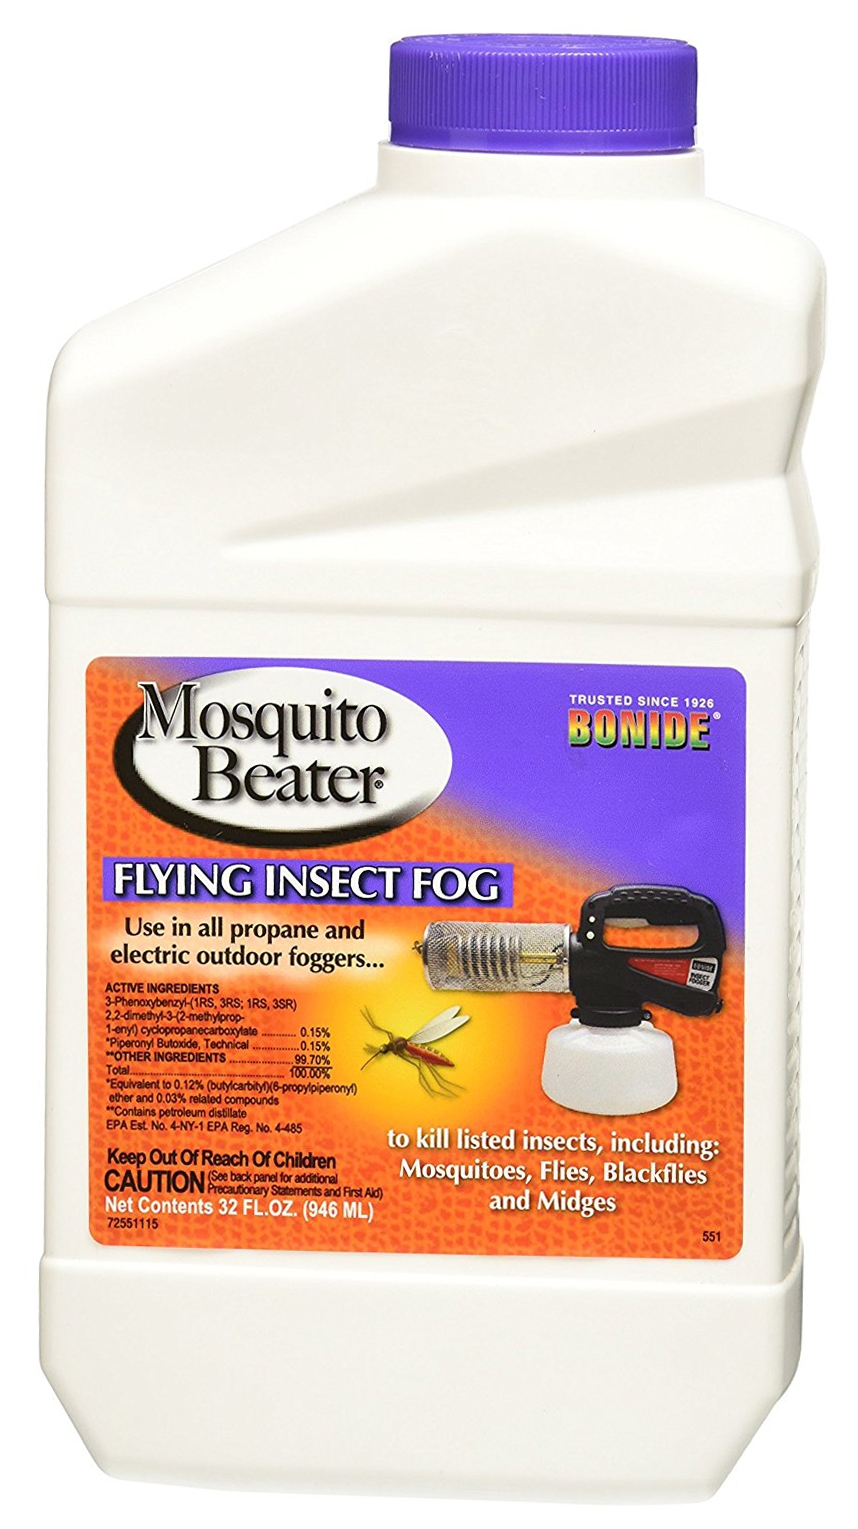 Bonide Mosquito Beater Flying Insect Fog (Quart #551)